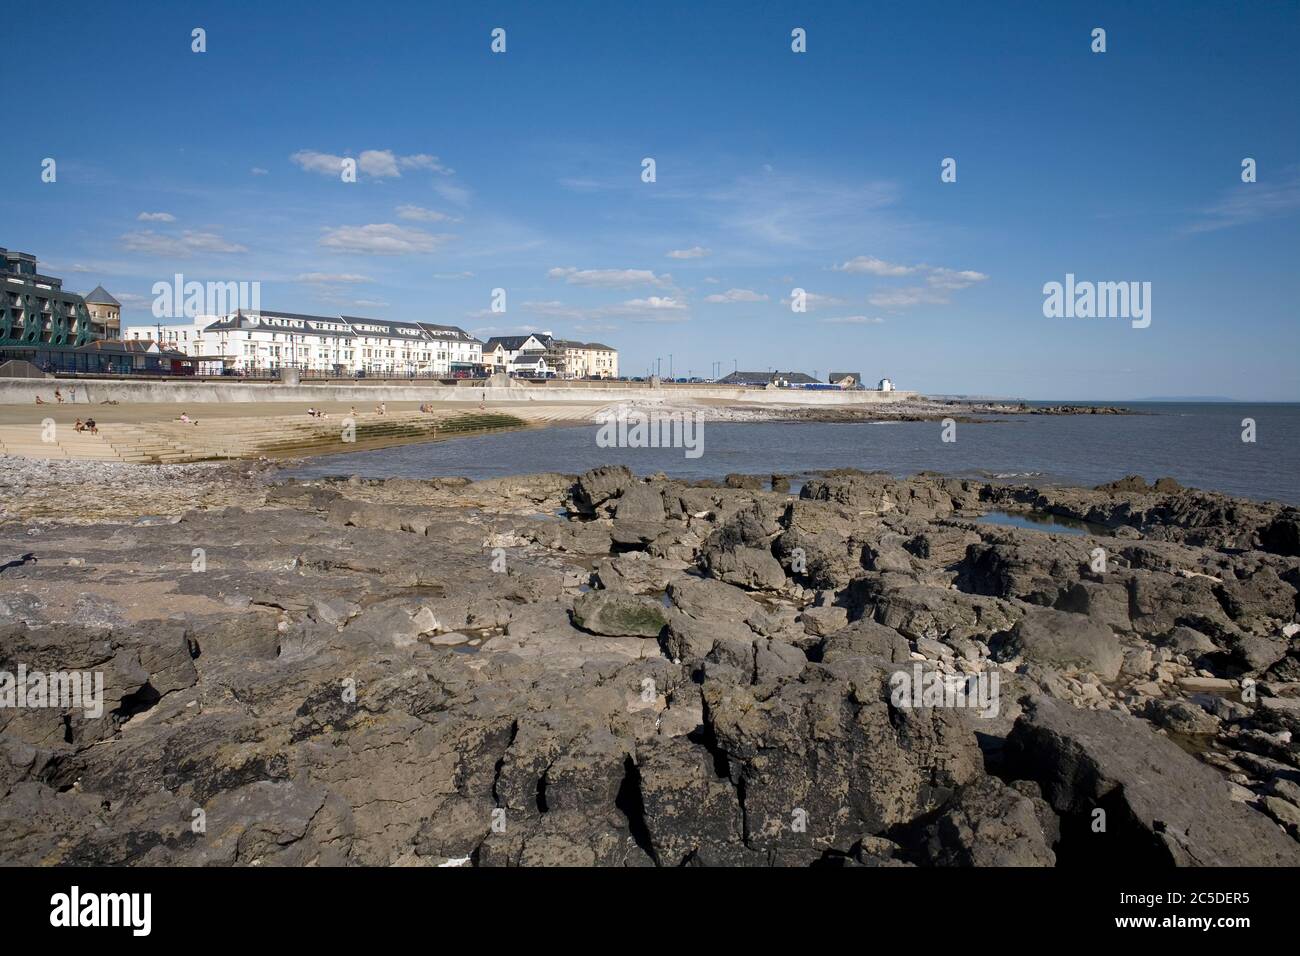 Porthcawl town centre beach with rocky foreground late in the afternoon on a warm early summer day Stock Photo